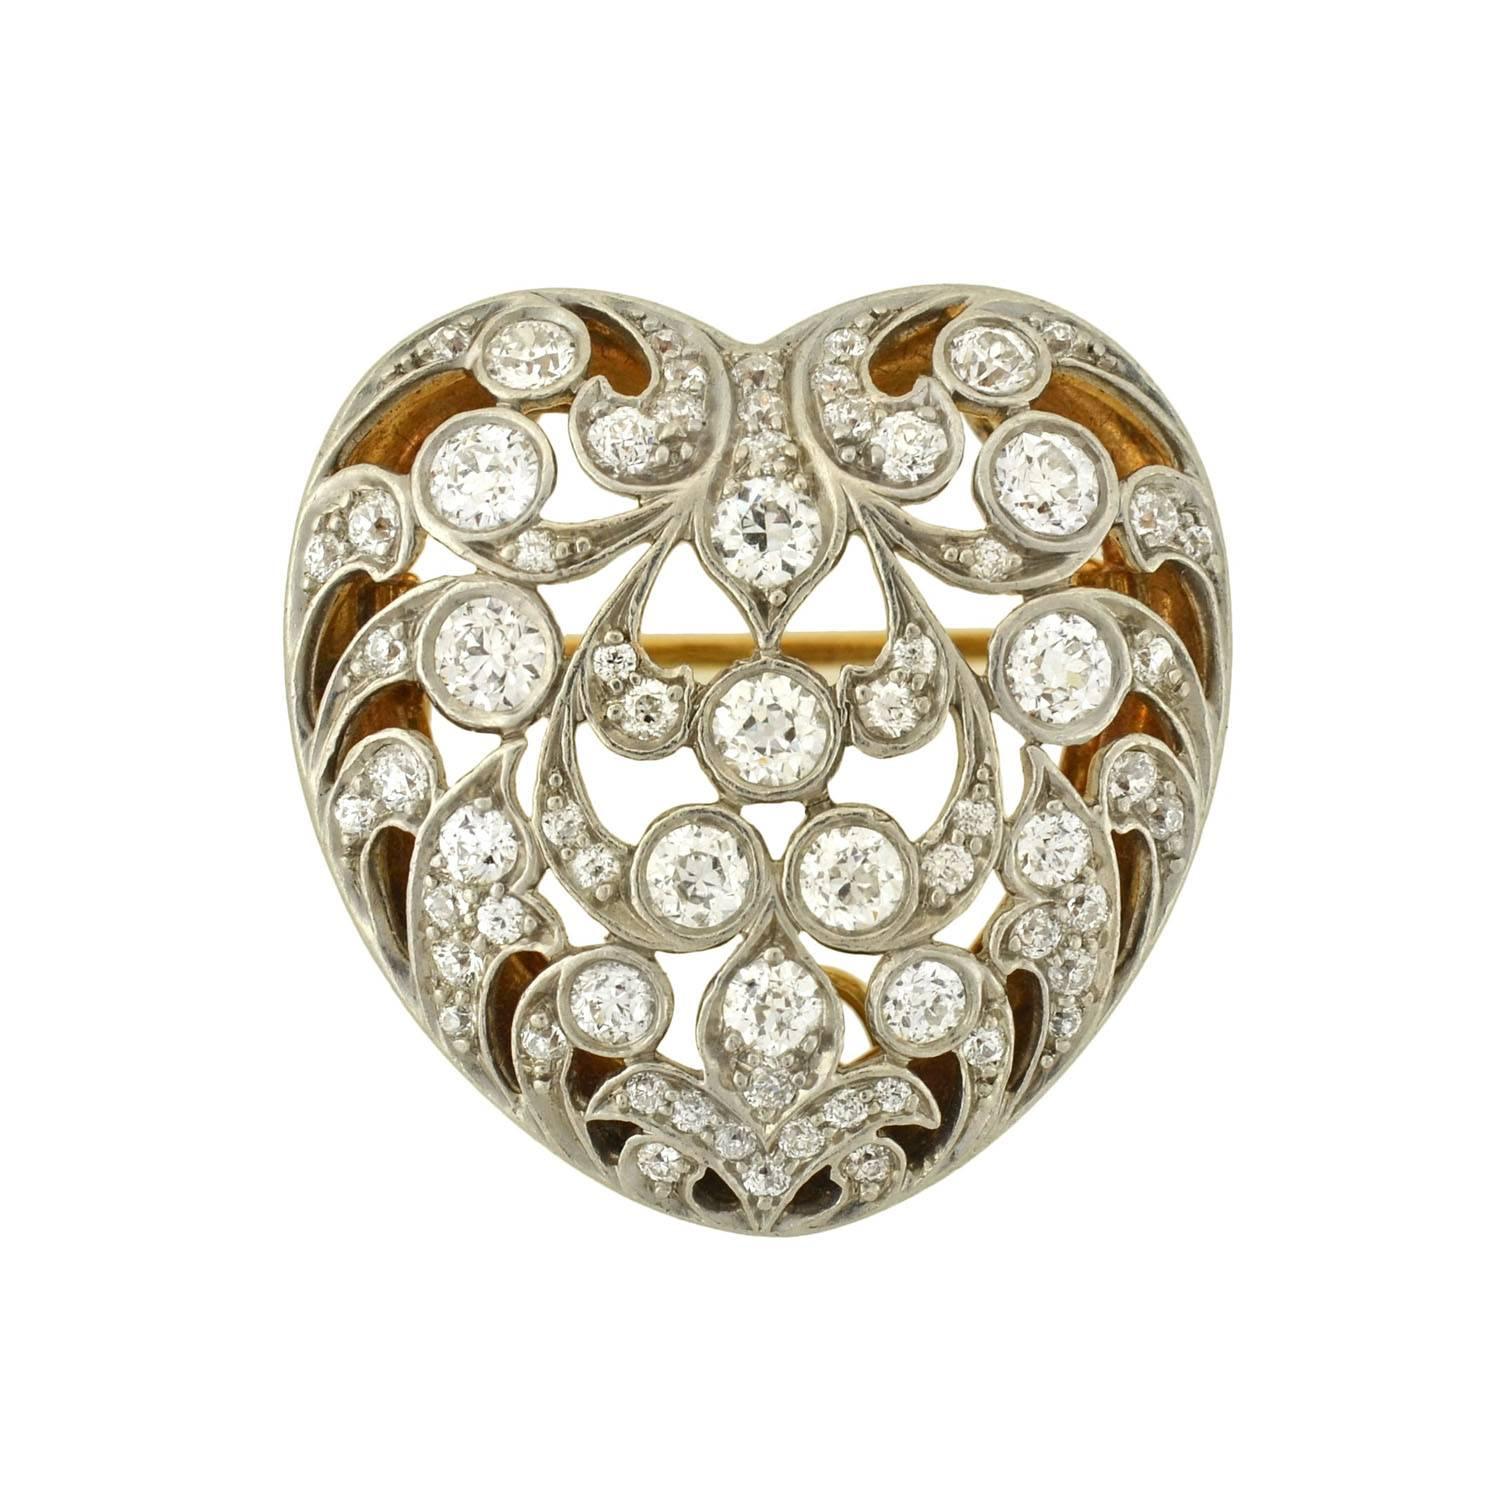 A gorgeous Tiffany & Company diamond heart pin/pendant from the Edwardian era (ca1910). This convex shaped puffy heart has a lacy floral motif which was common for the Edwardian period. The pin/pendant is comprised of approximately 2.5ctw of